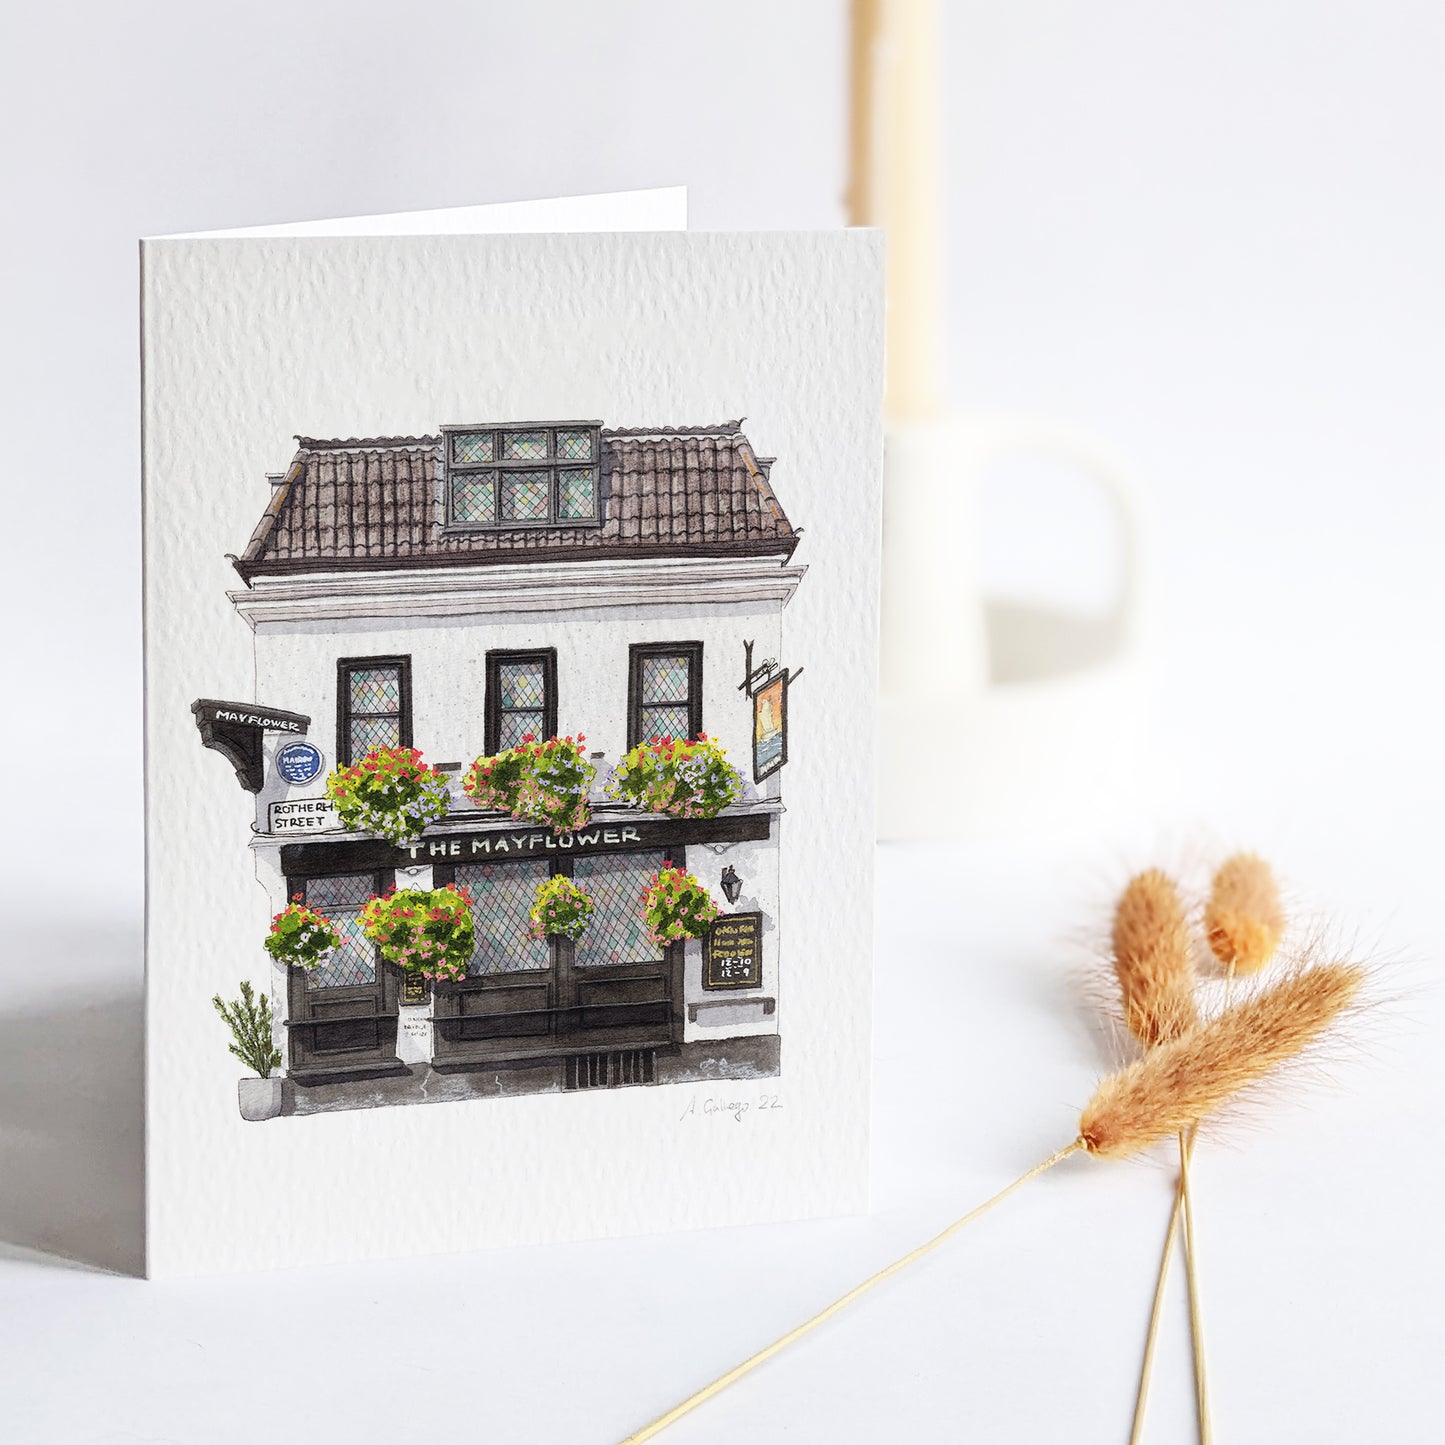 Rotherhithe - The Mayflower Pub - Greeting card with envelope